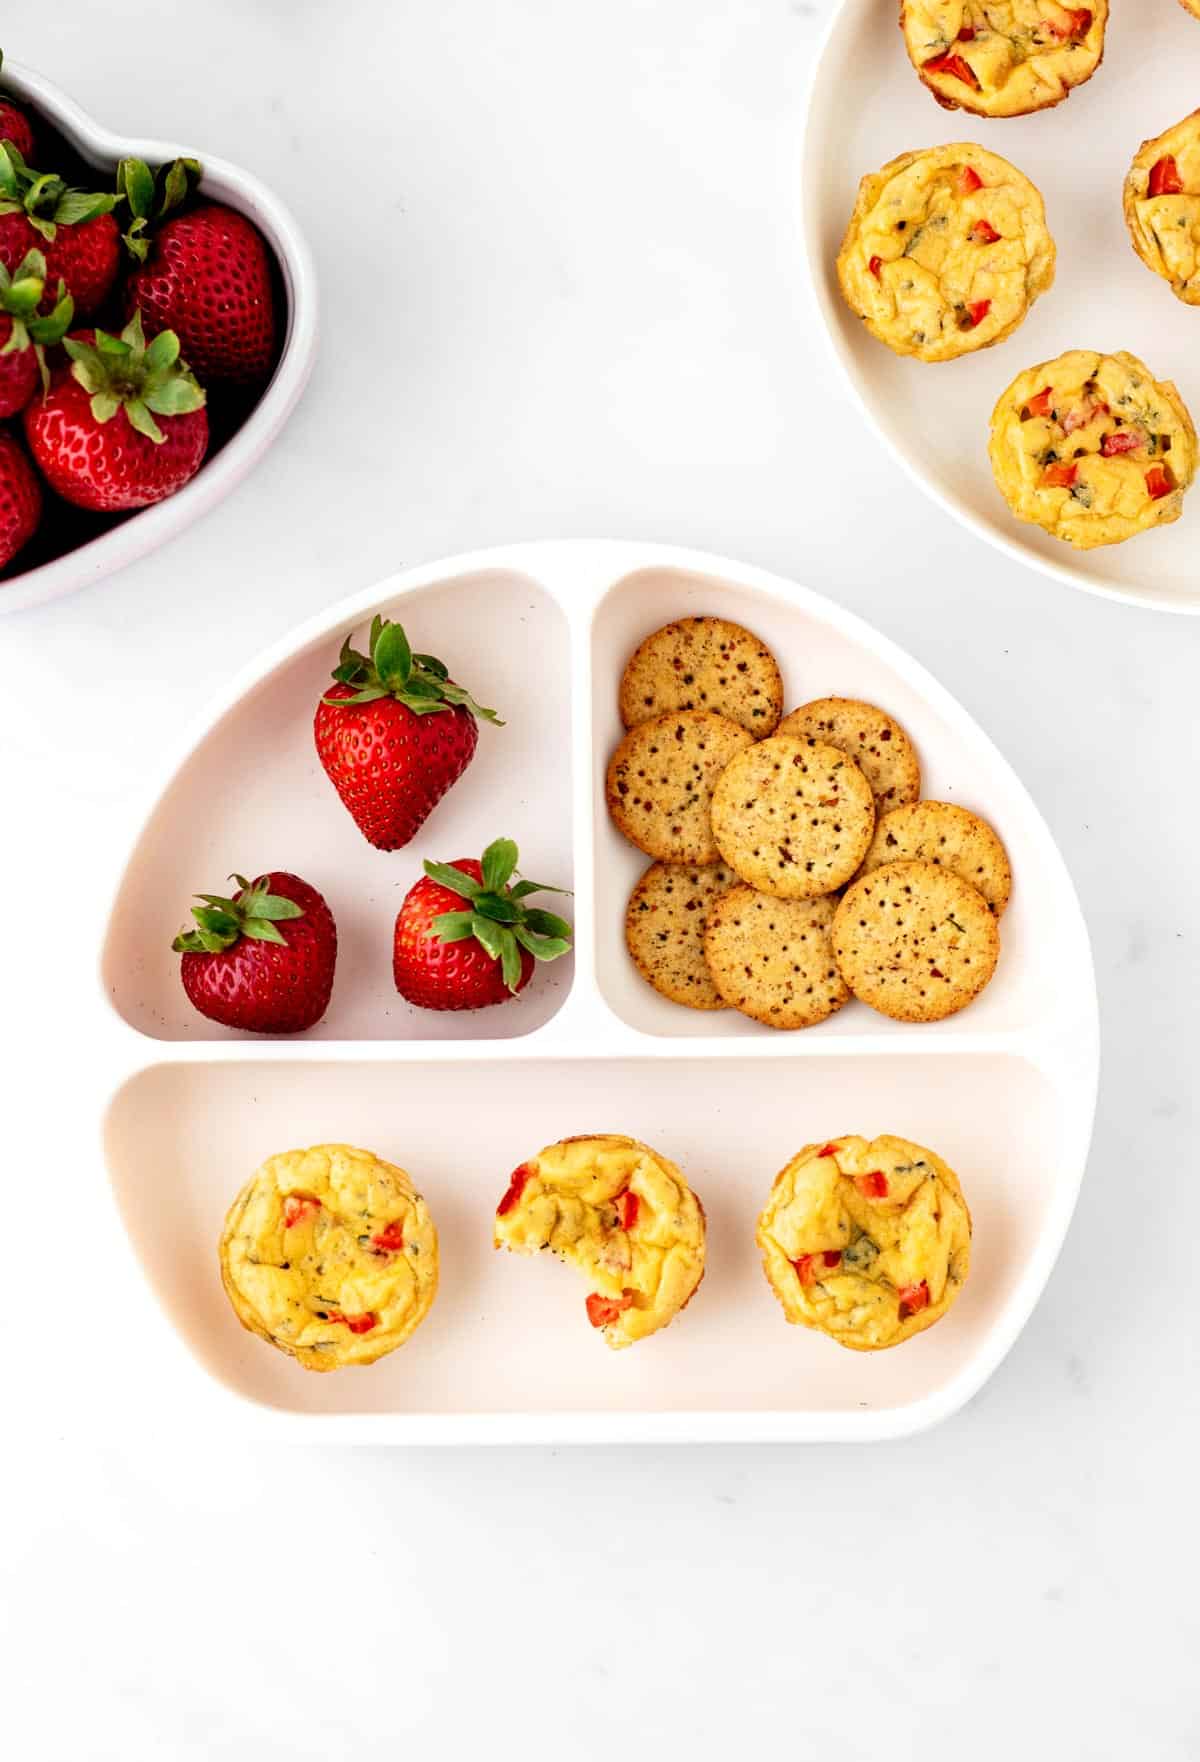 Mini egg bites on a plate with crackers and strawberries.